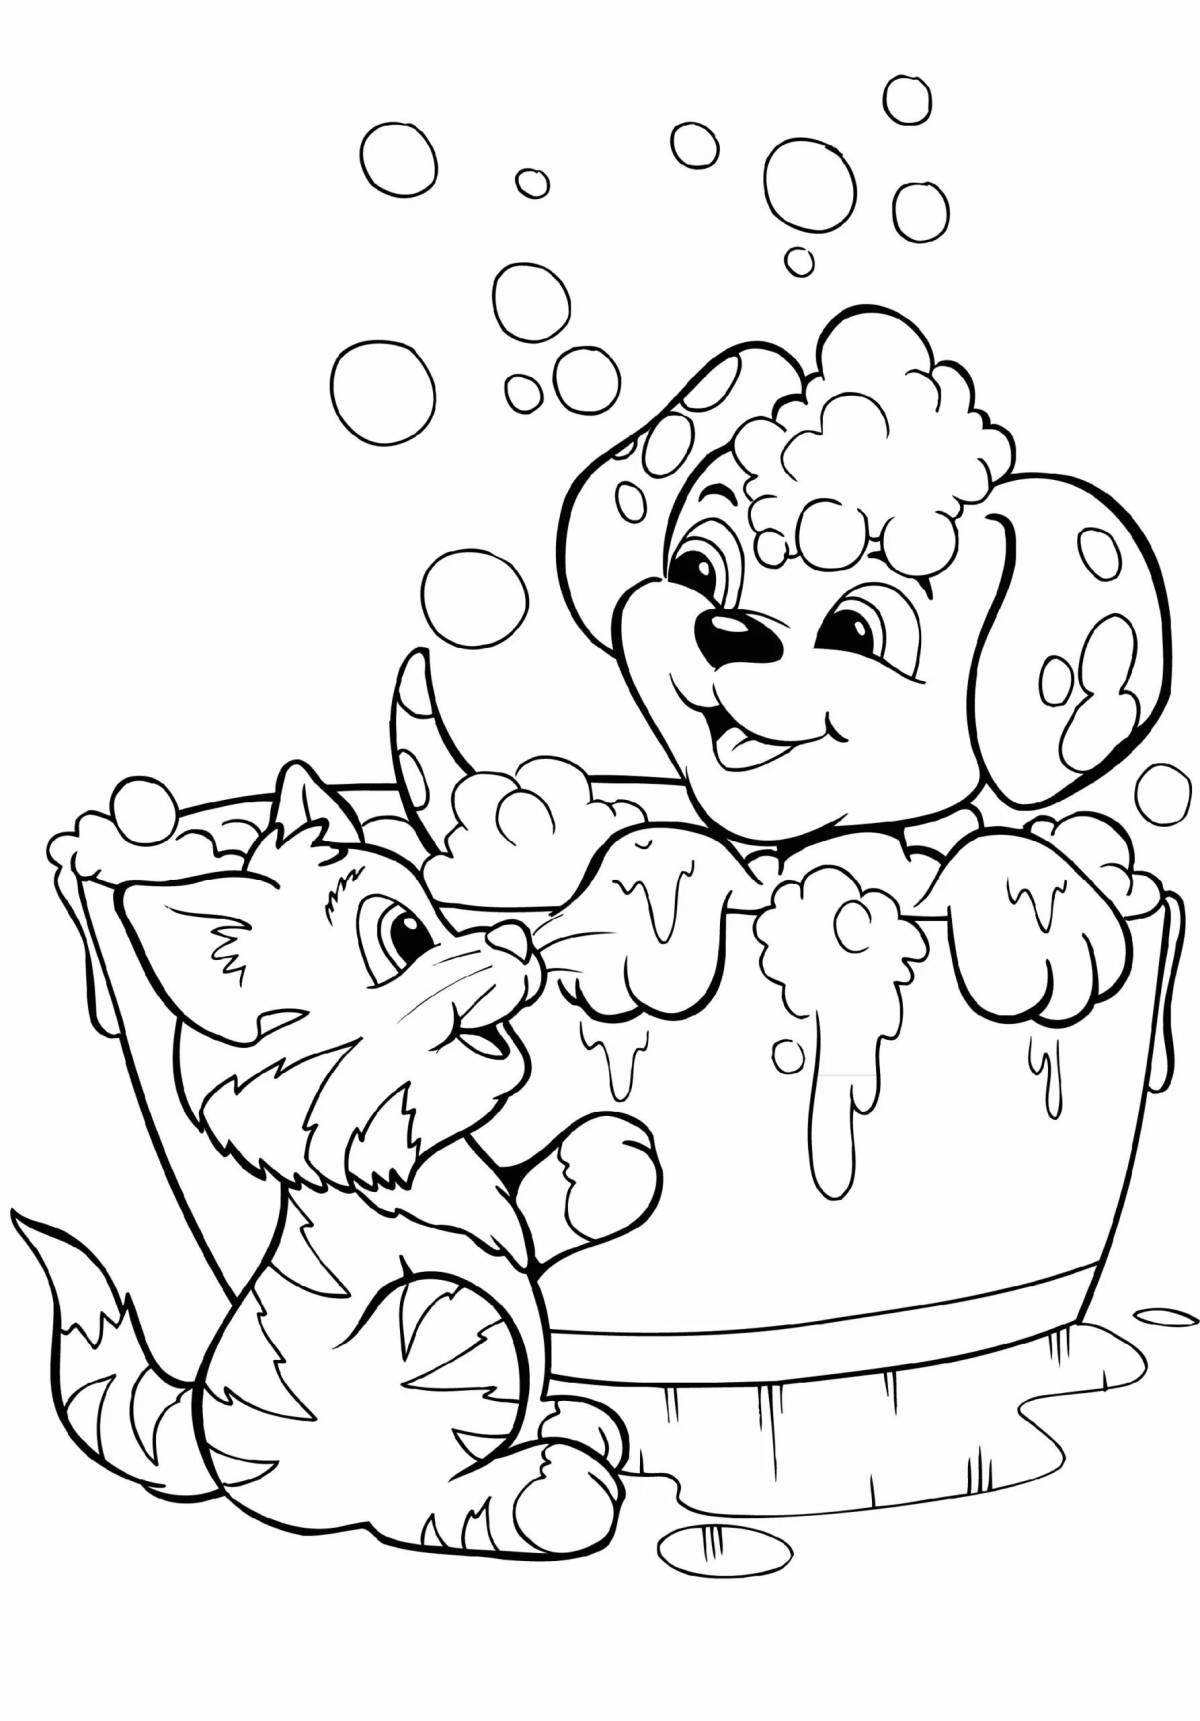 Coloring book mischievous kitten and dog